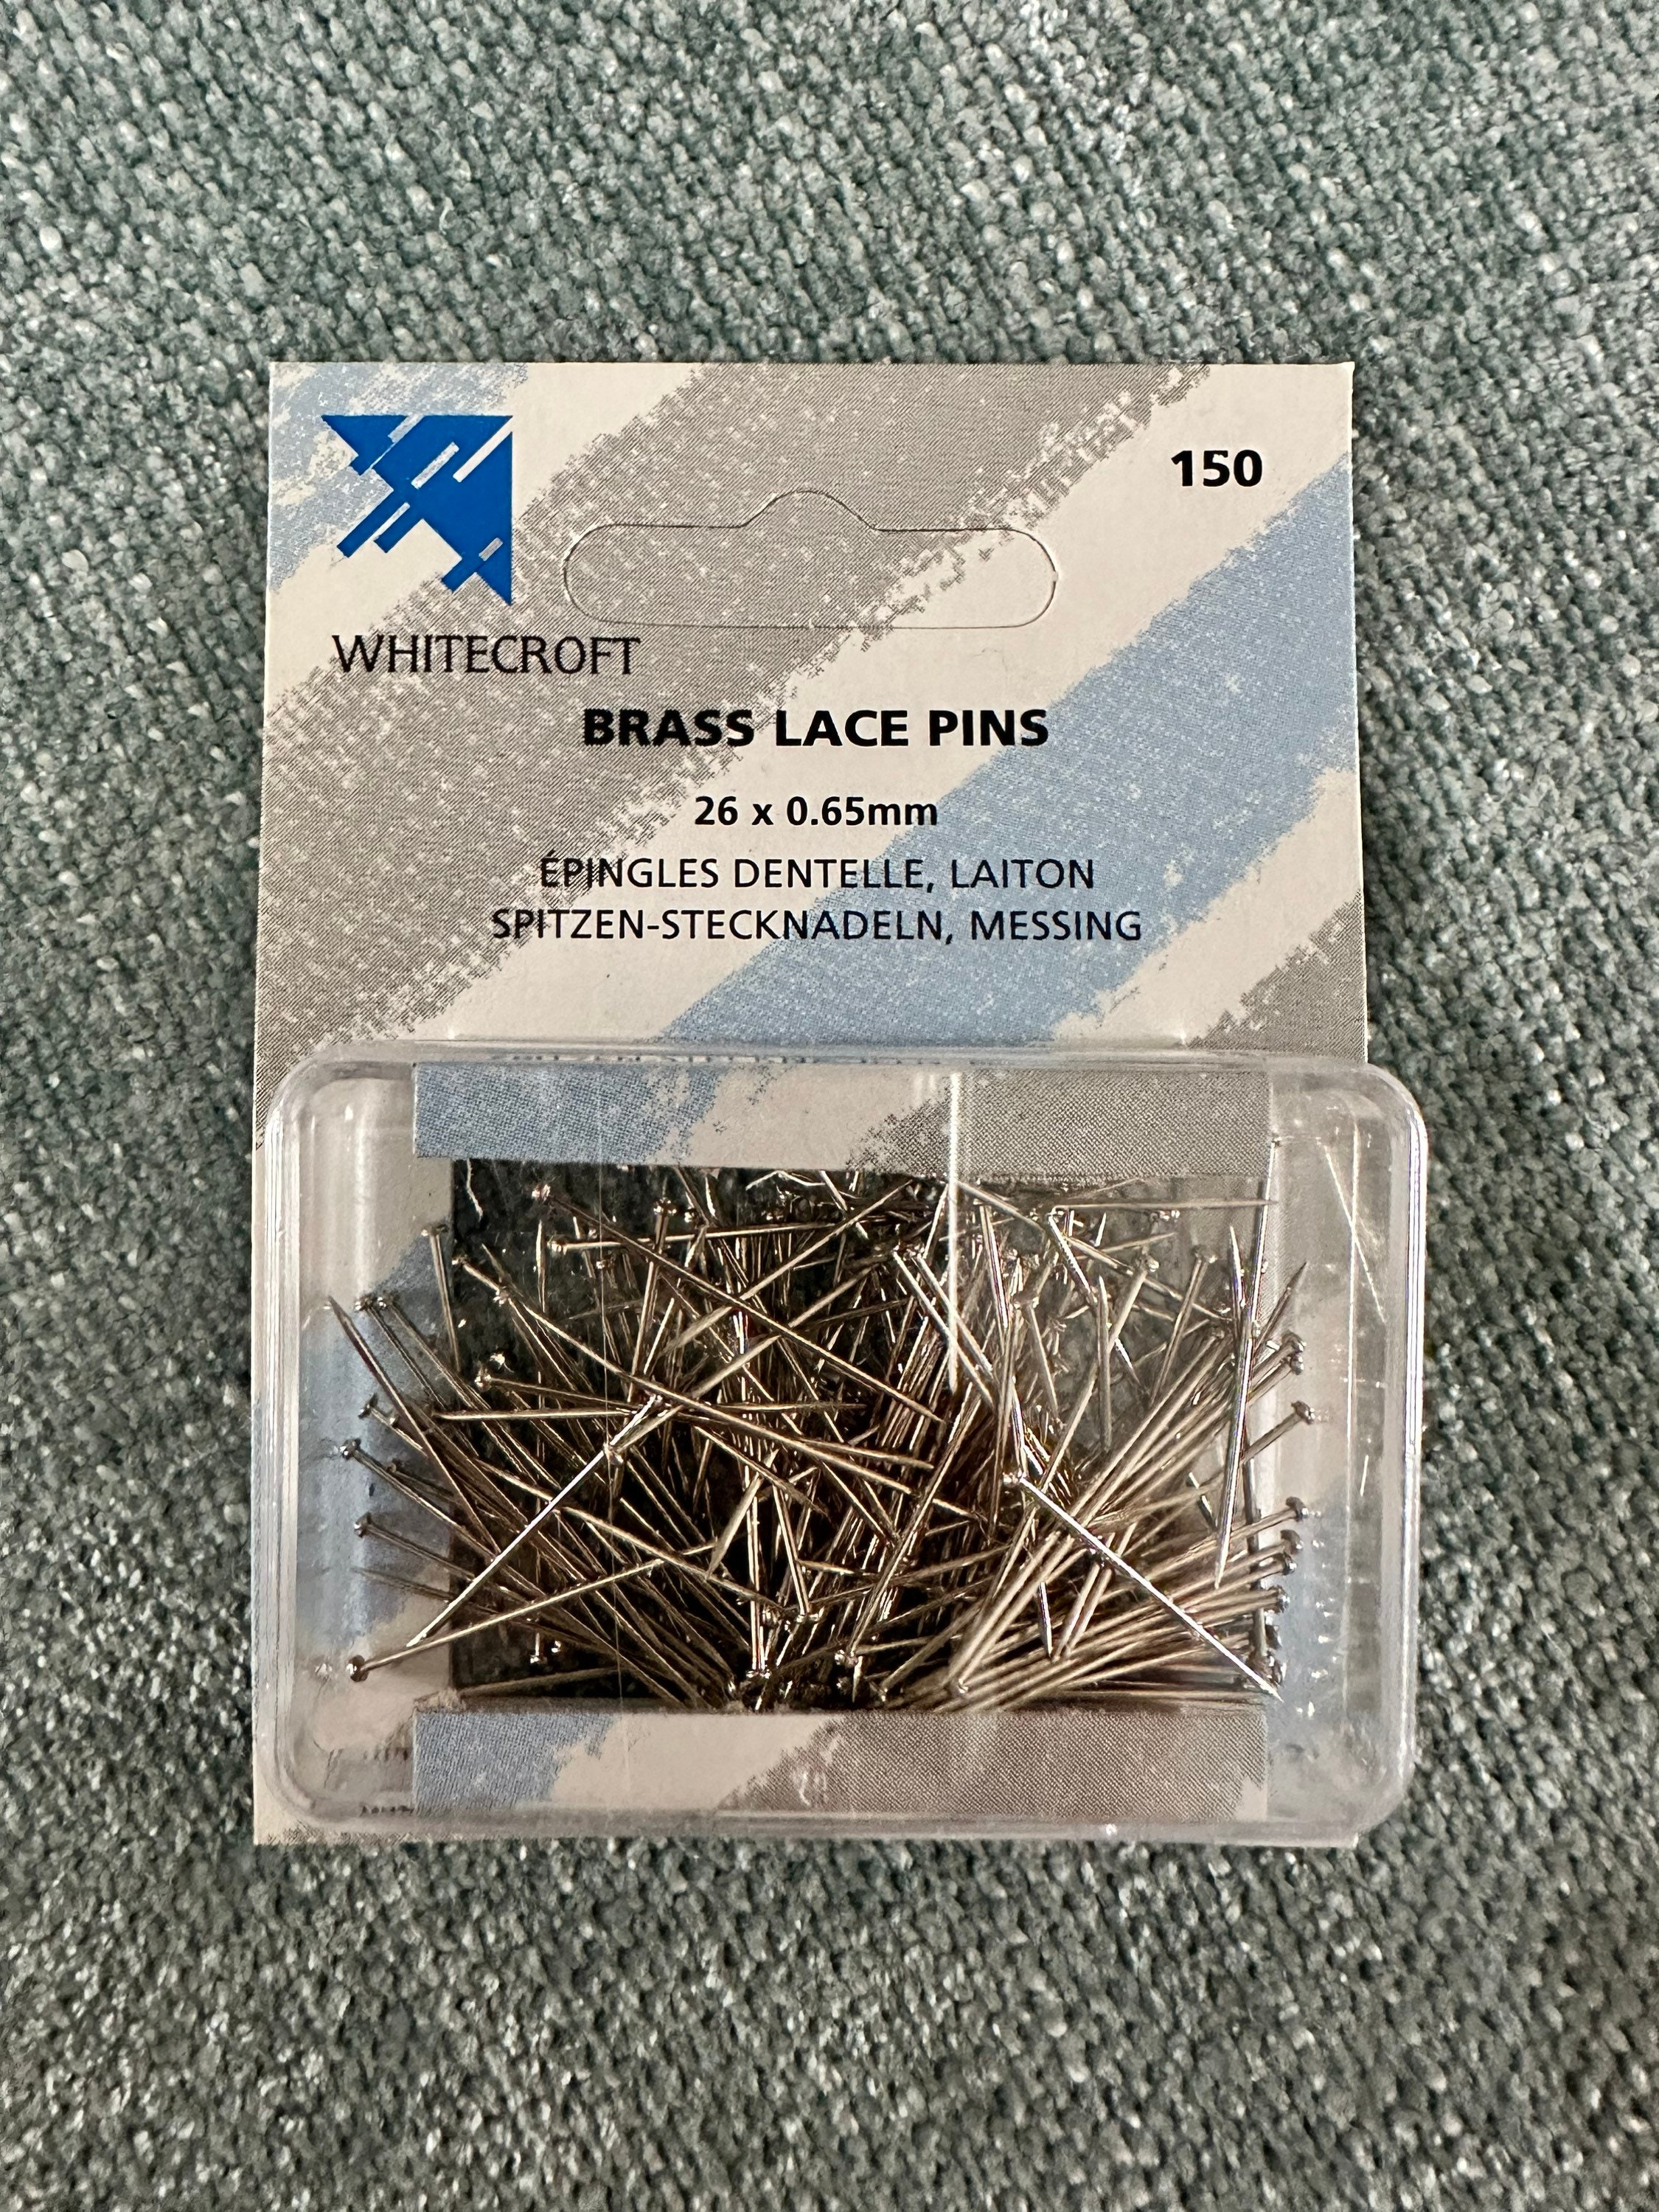 T-Needles / T-pins For Lace Blocking, Accessories